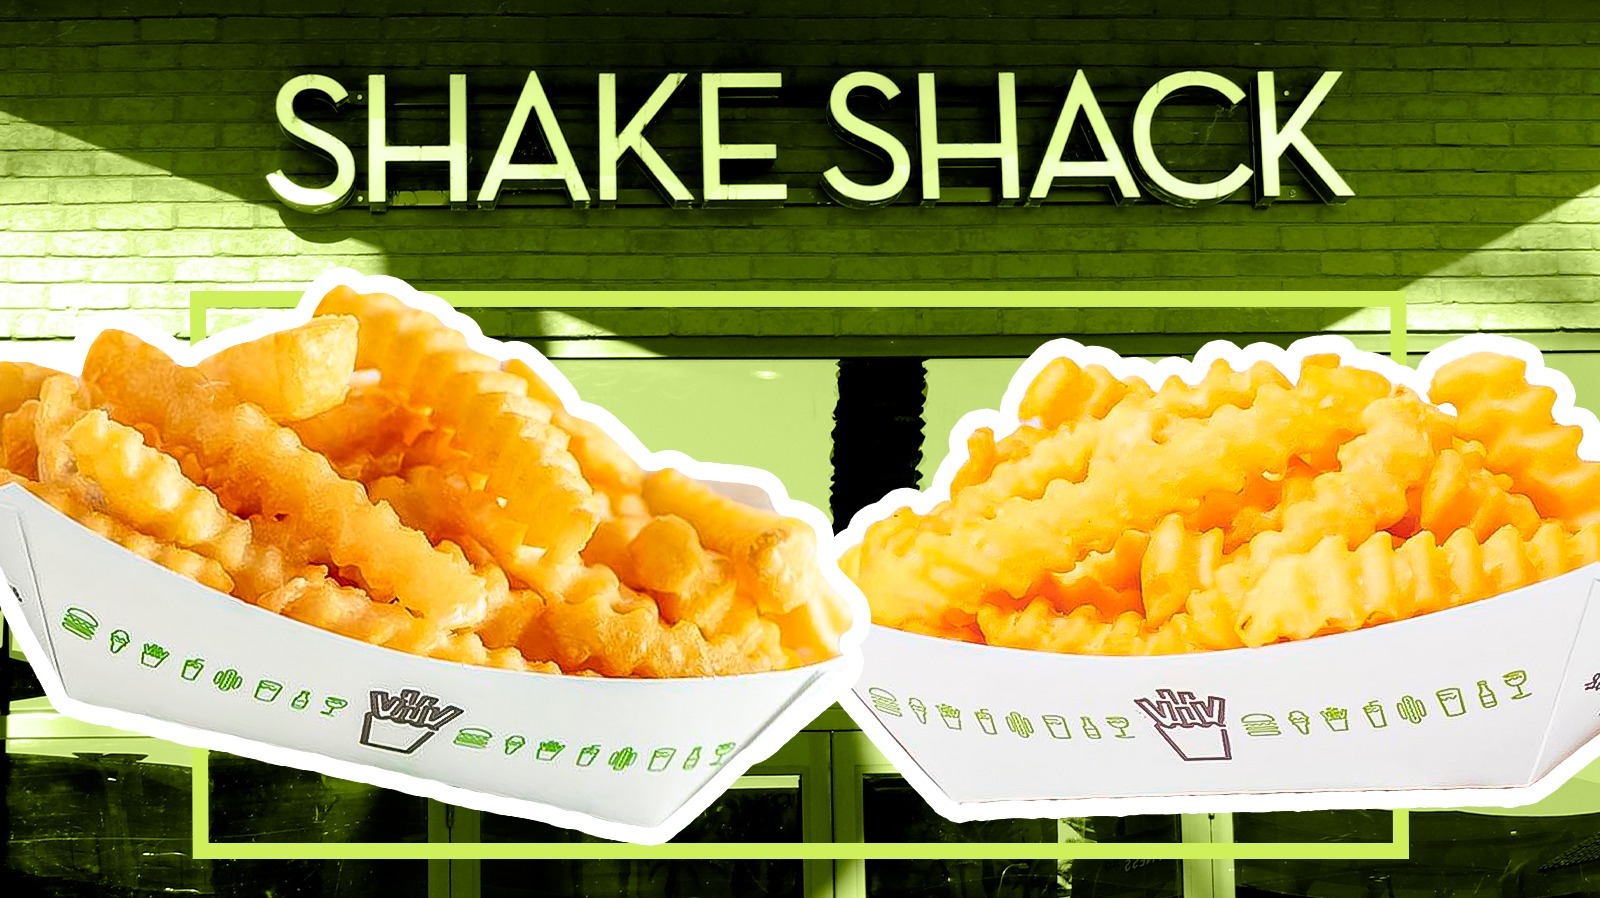 https://www.tastingtable.com/img/gallery/we-tried-the-new-shake-shack-fries-cooked-in-sugarcane-oil-and-its-a-game-changer/l-intro-1695407057.jpg